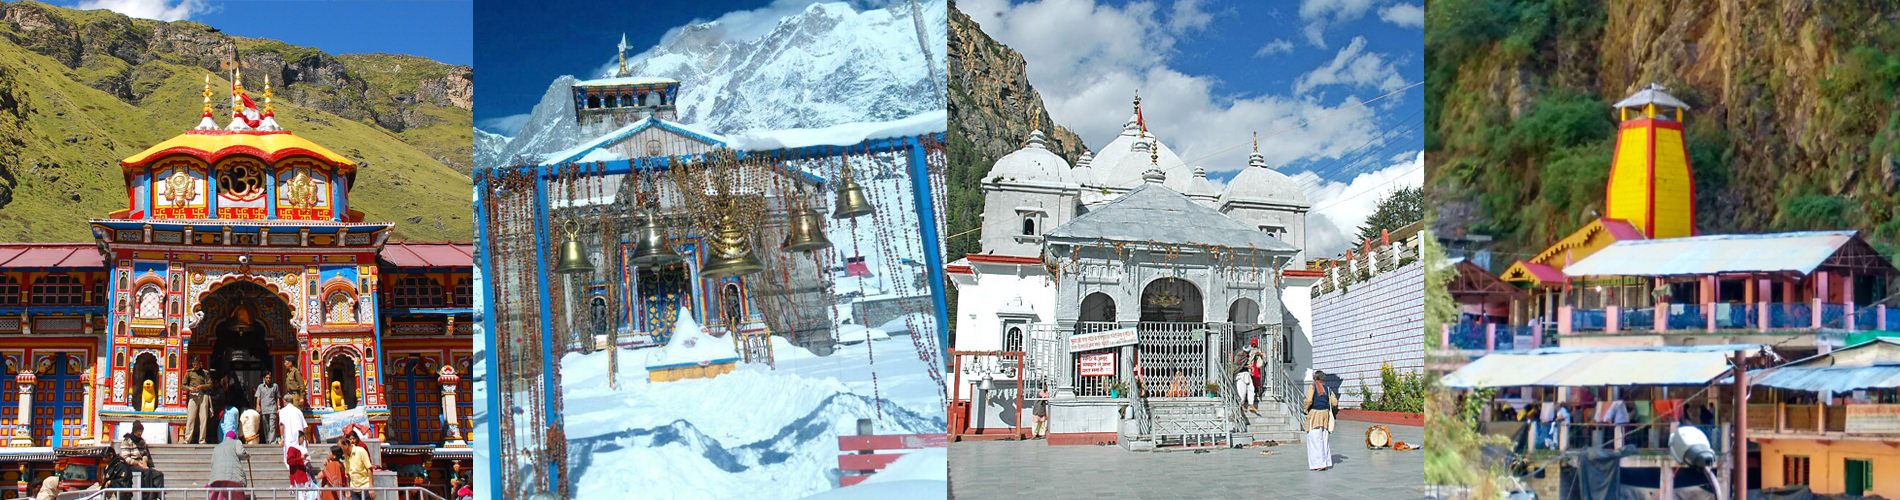 Char Dham Package